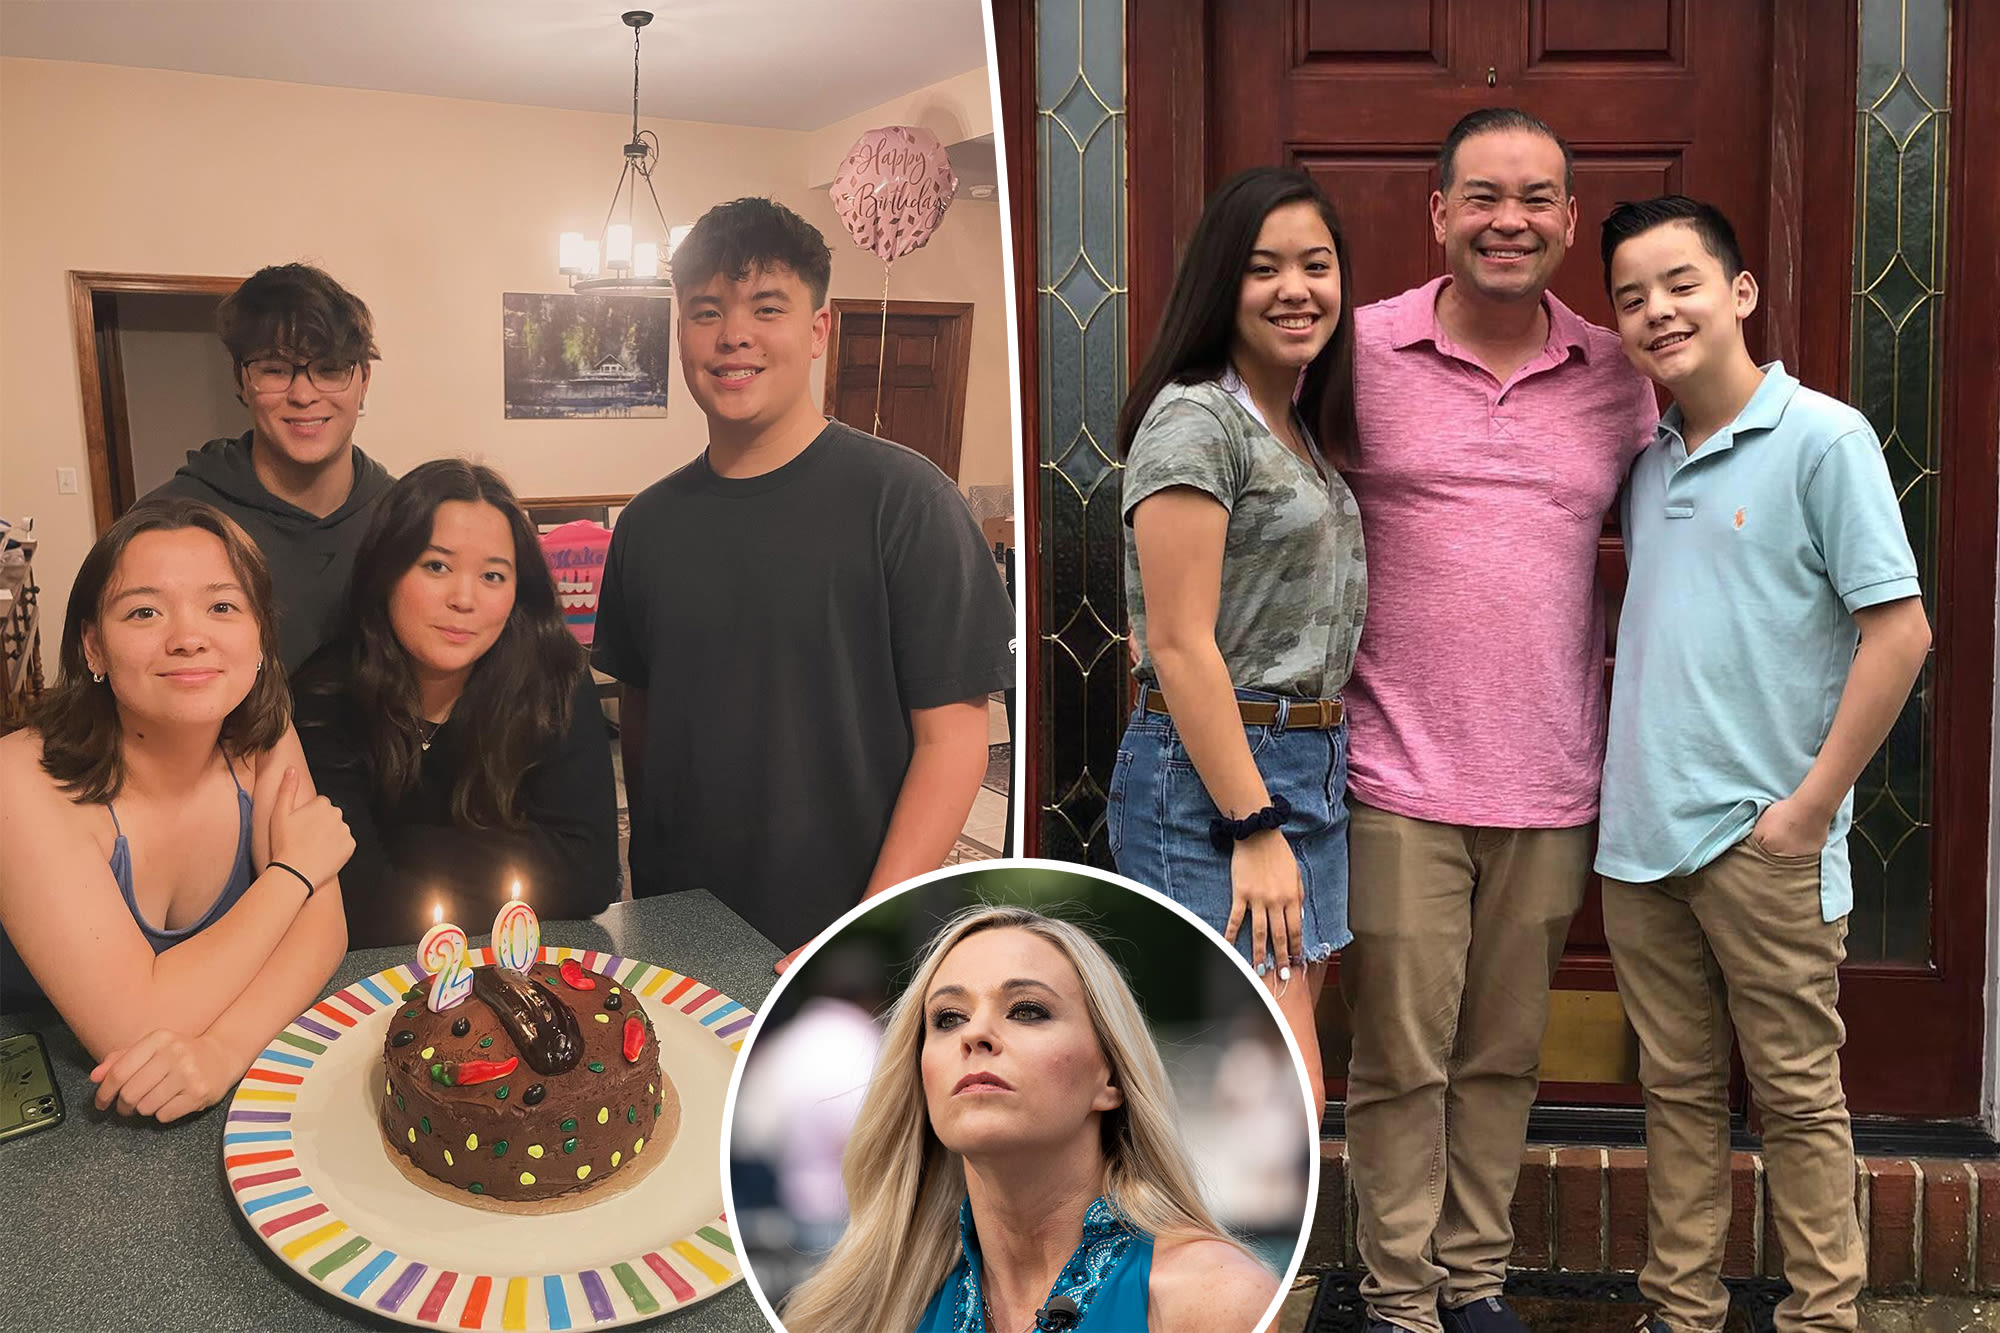 Kate Gosselin celebrates 4 of her sextuplets on their 20th birthday — and snubs the other 2